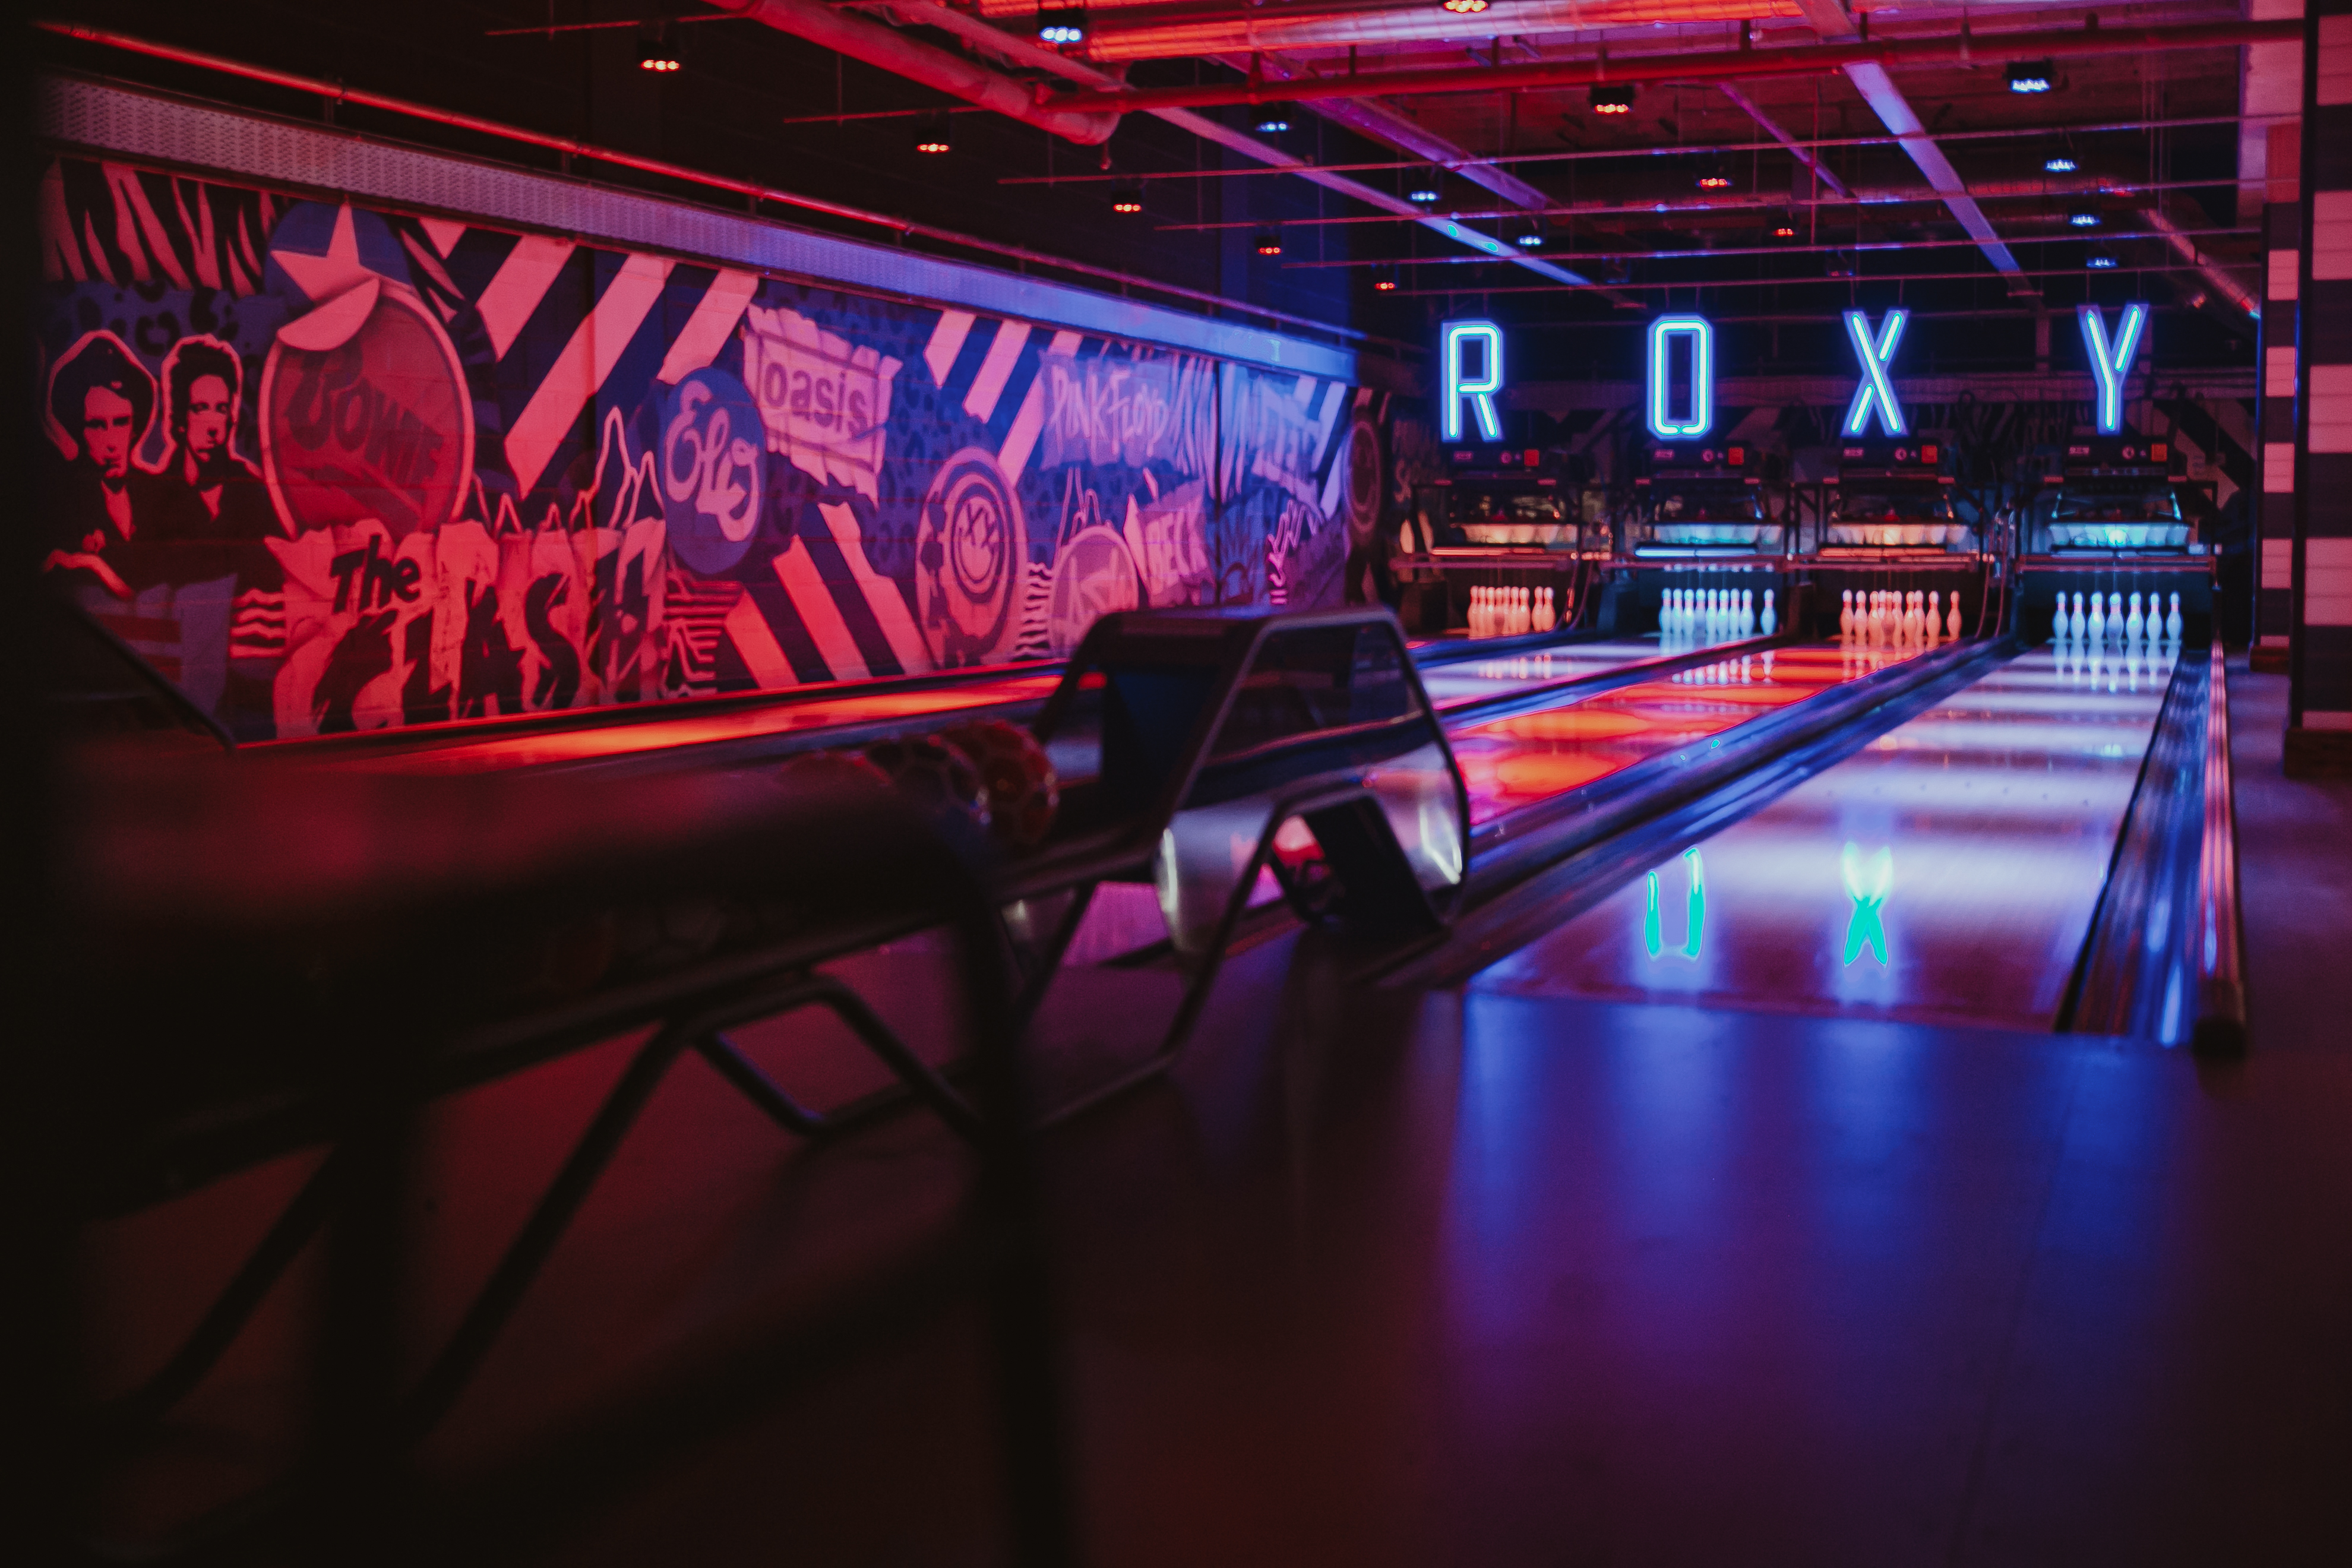 ROXY LANES IS COMING TO BRISTOL!